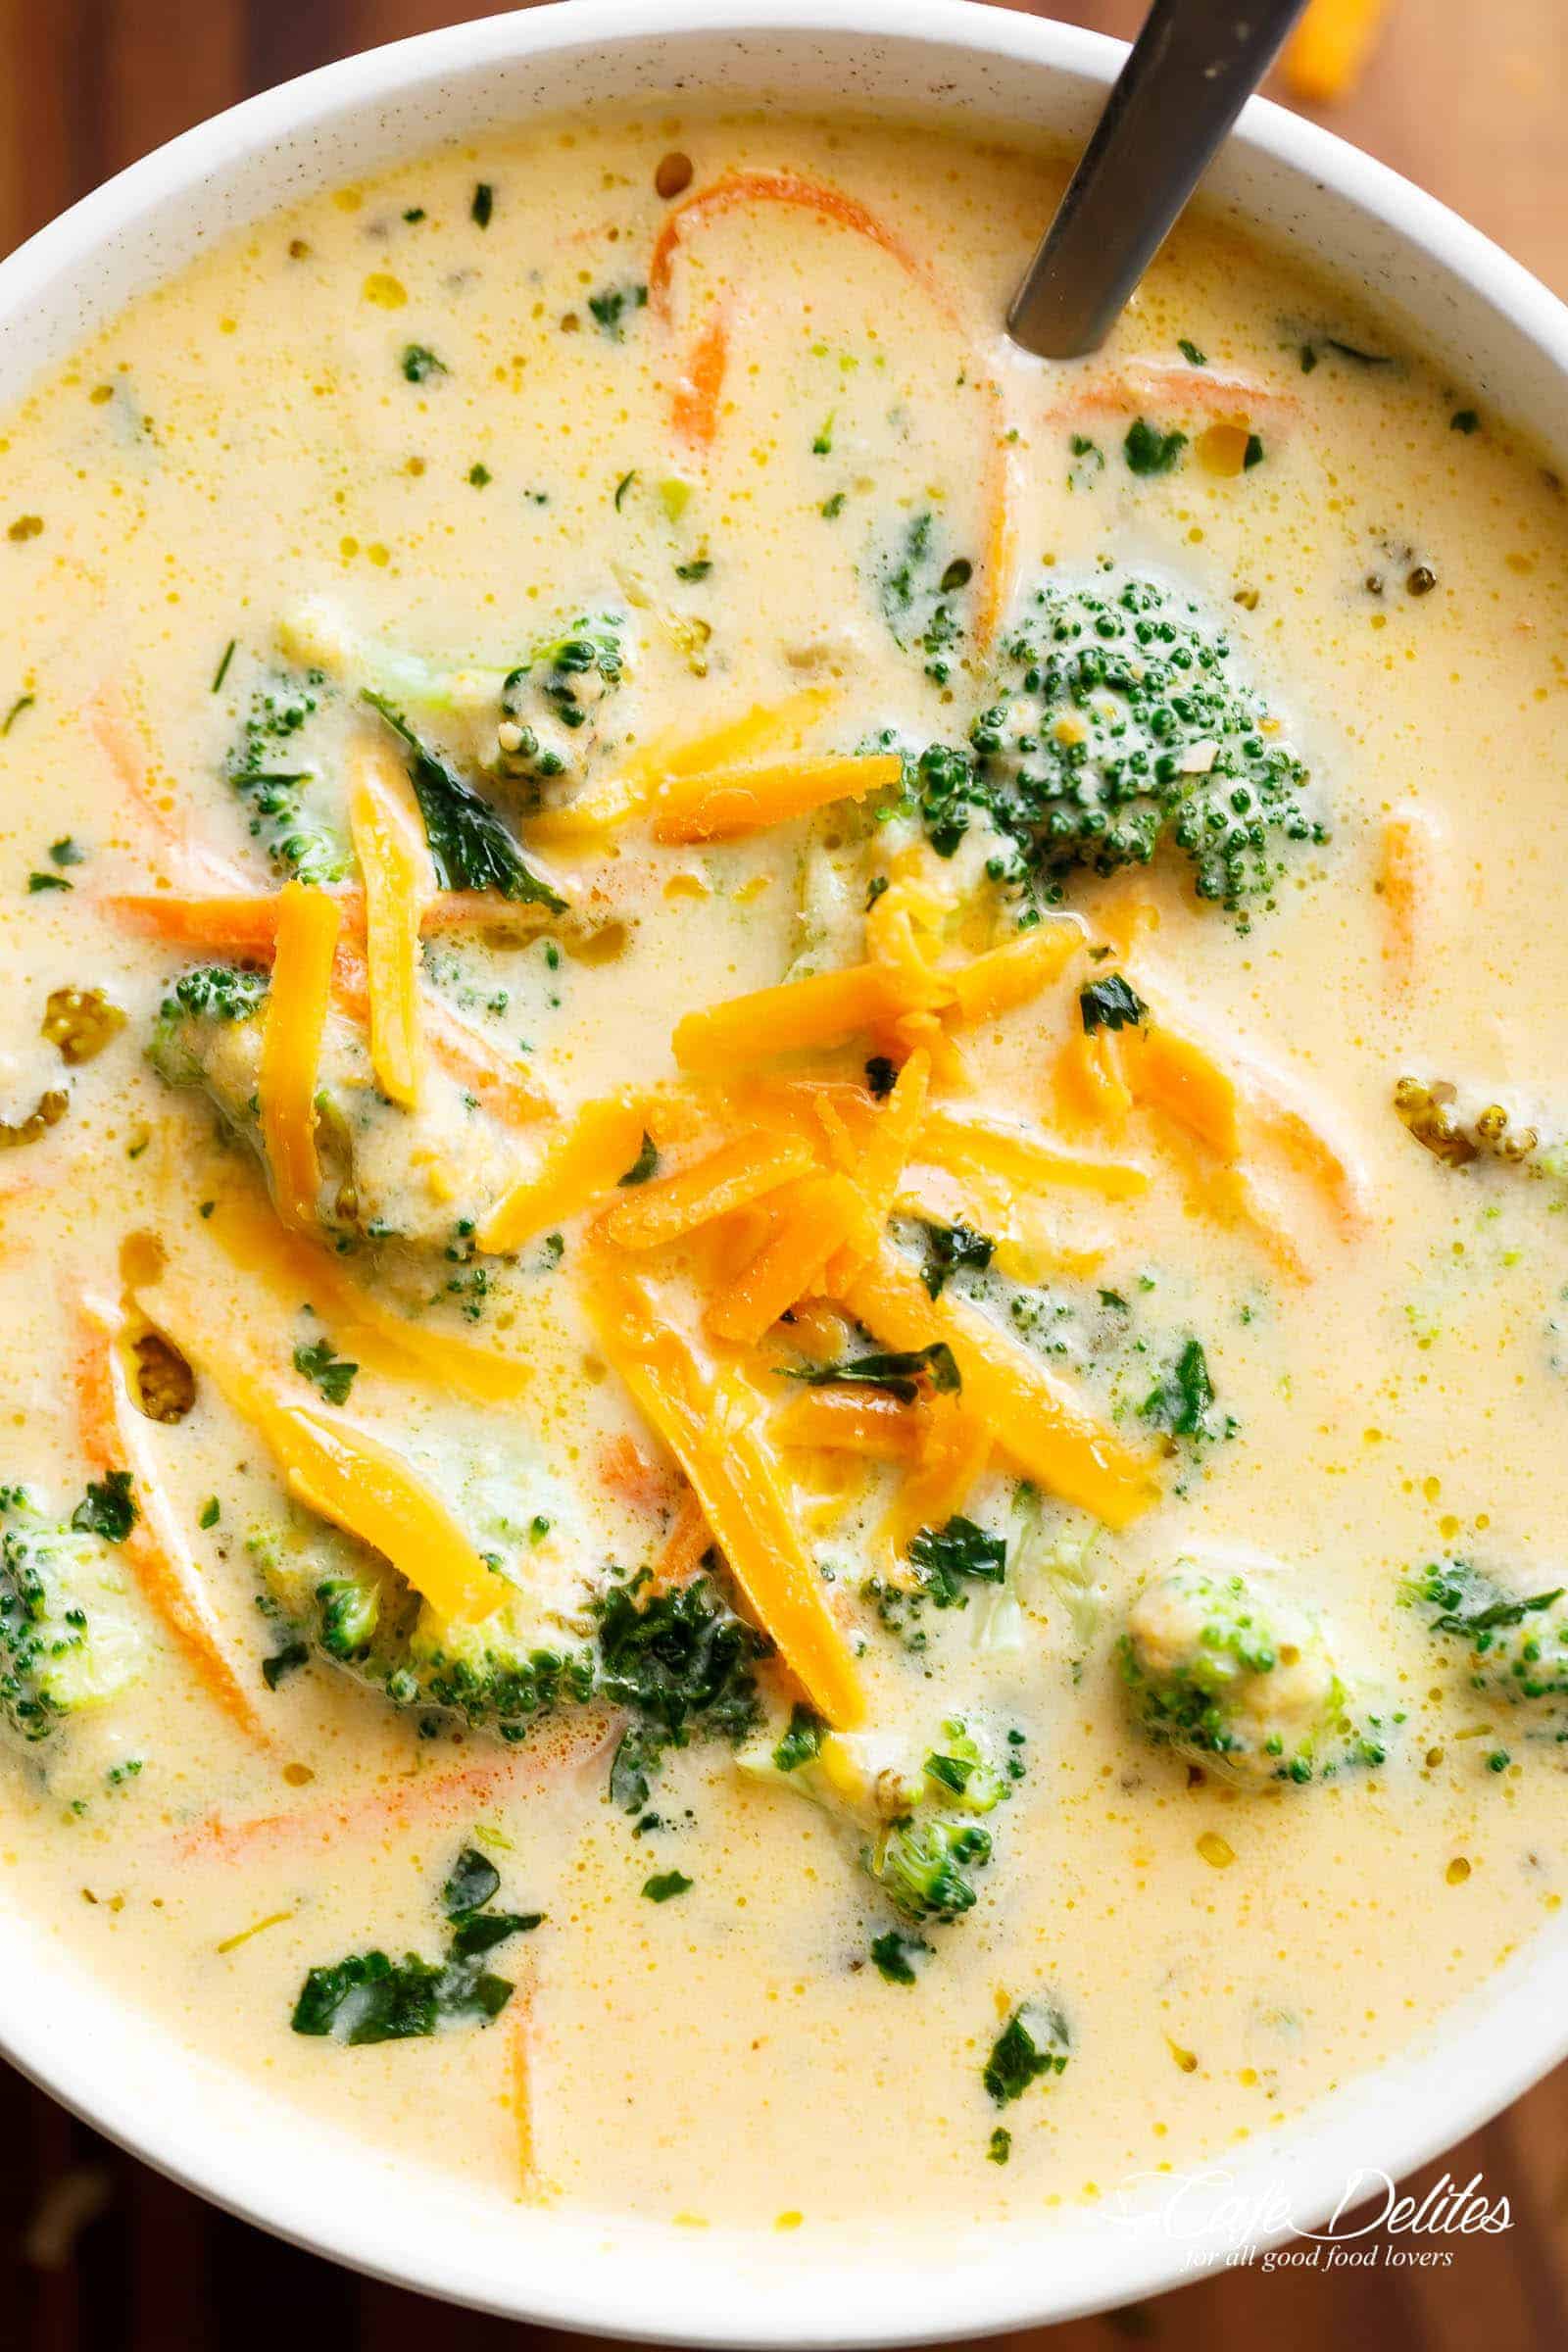 Broccoli Cheese Soup is so good you'll be eating it right out of the pot! | cafedelites.com